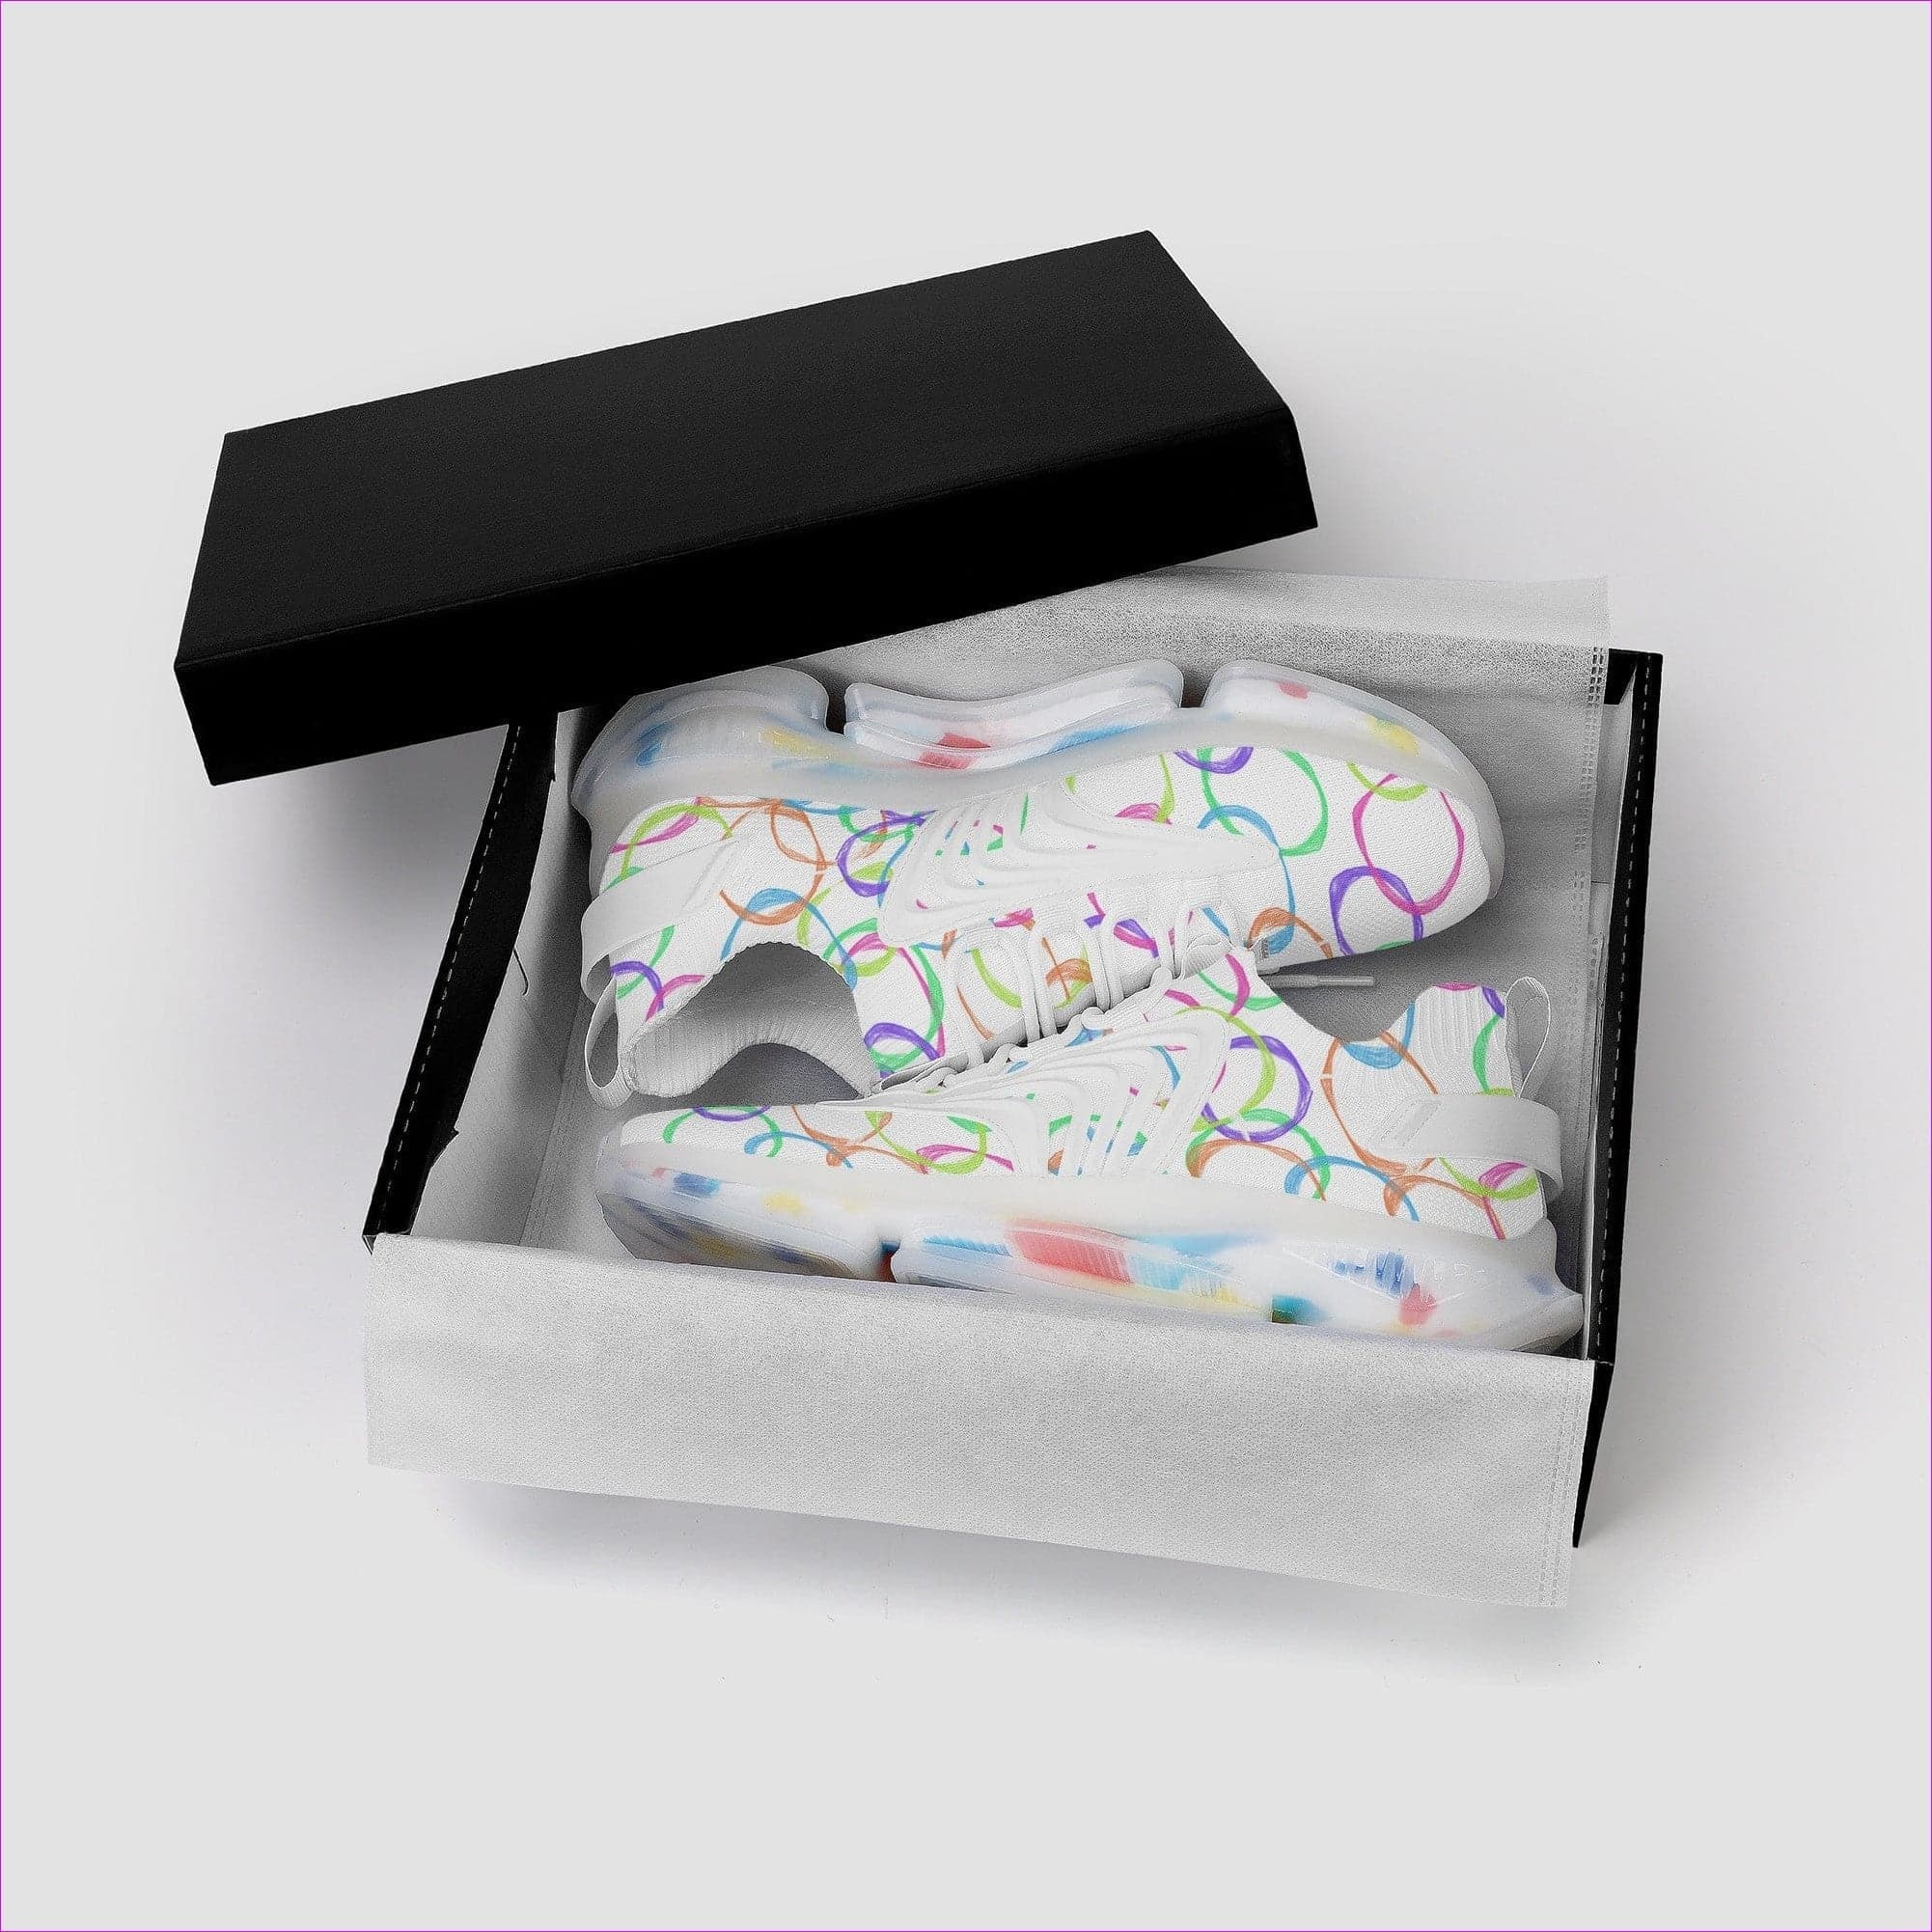 - Bubbles React Sneakers - womens shoes at TFC&H Co.